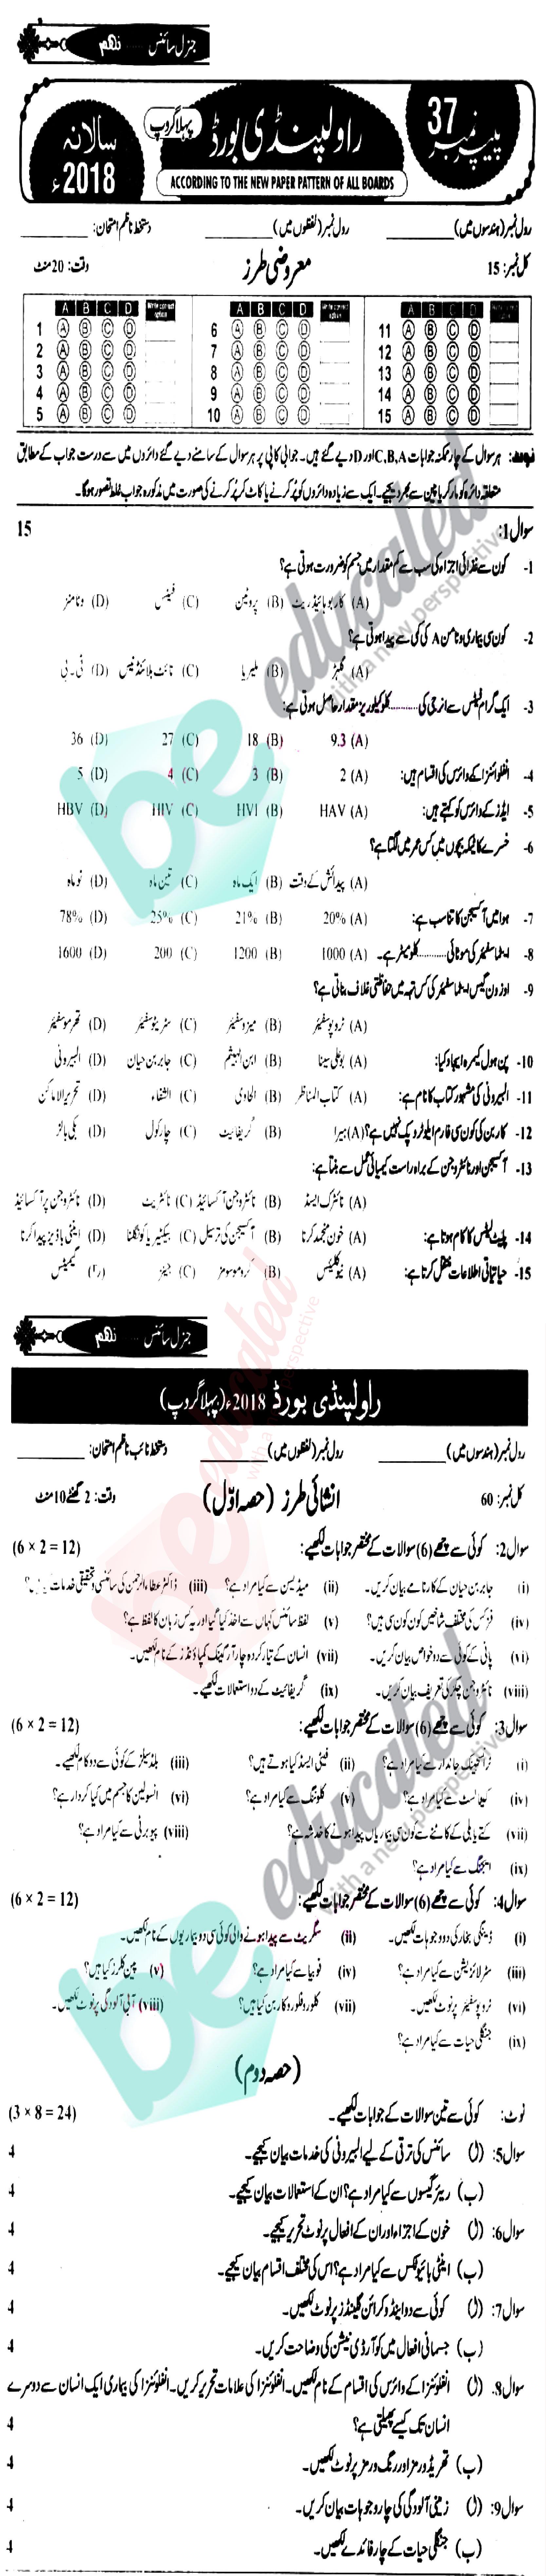 Science 9th Class Past Paper Group 1 BISE Rawalpindi 2018